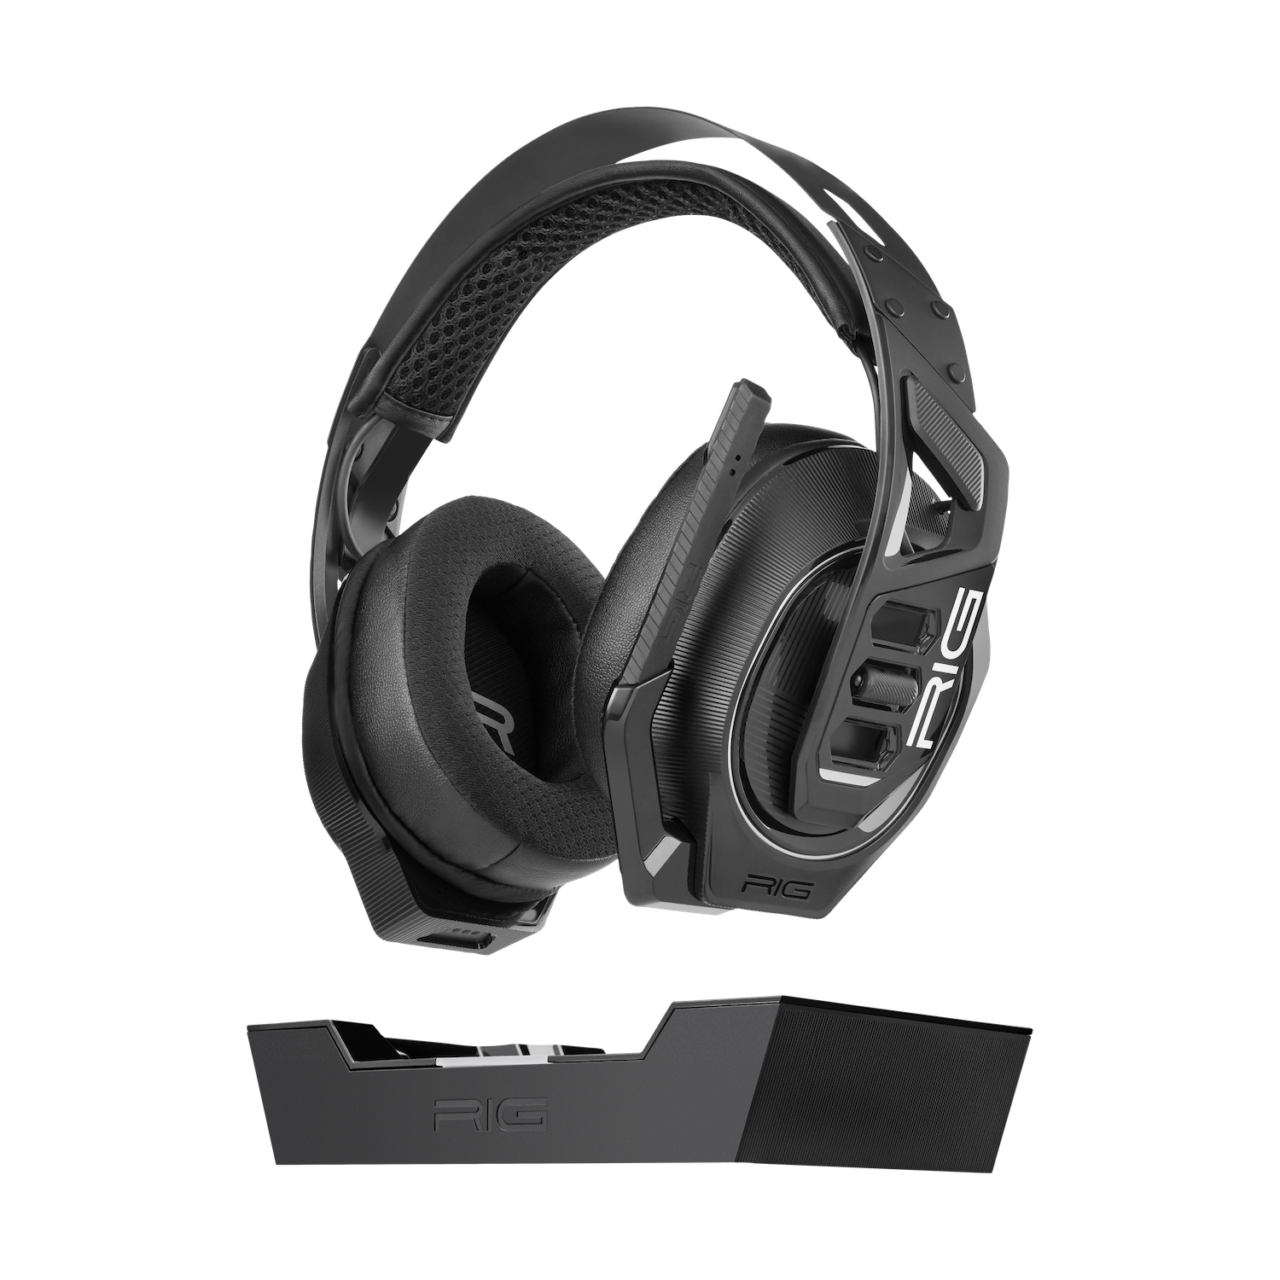 RIG 900 MAX HX Definitive Wireless Gaming Headset image (NACON)